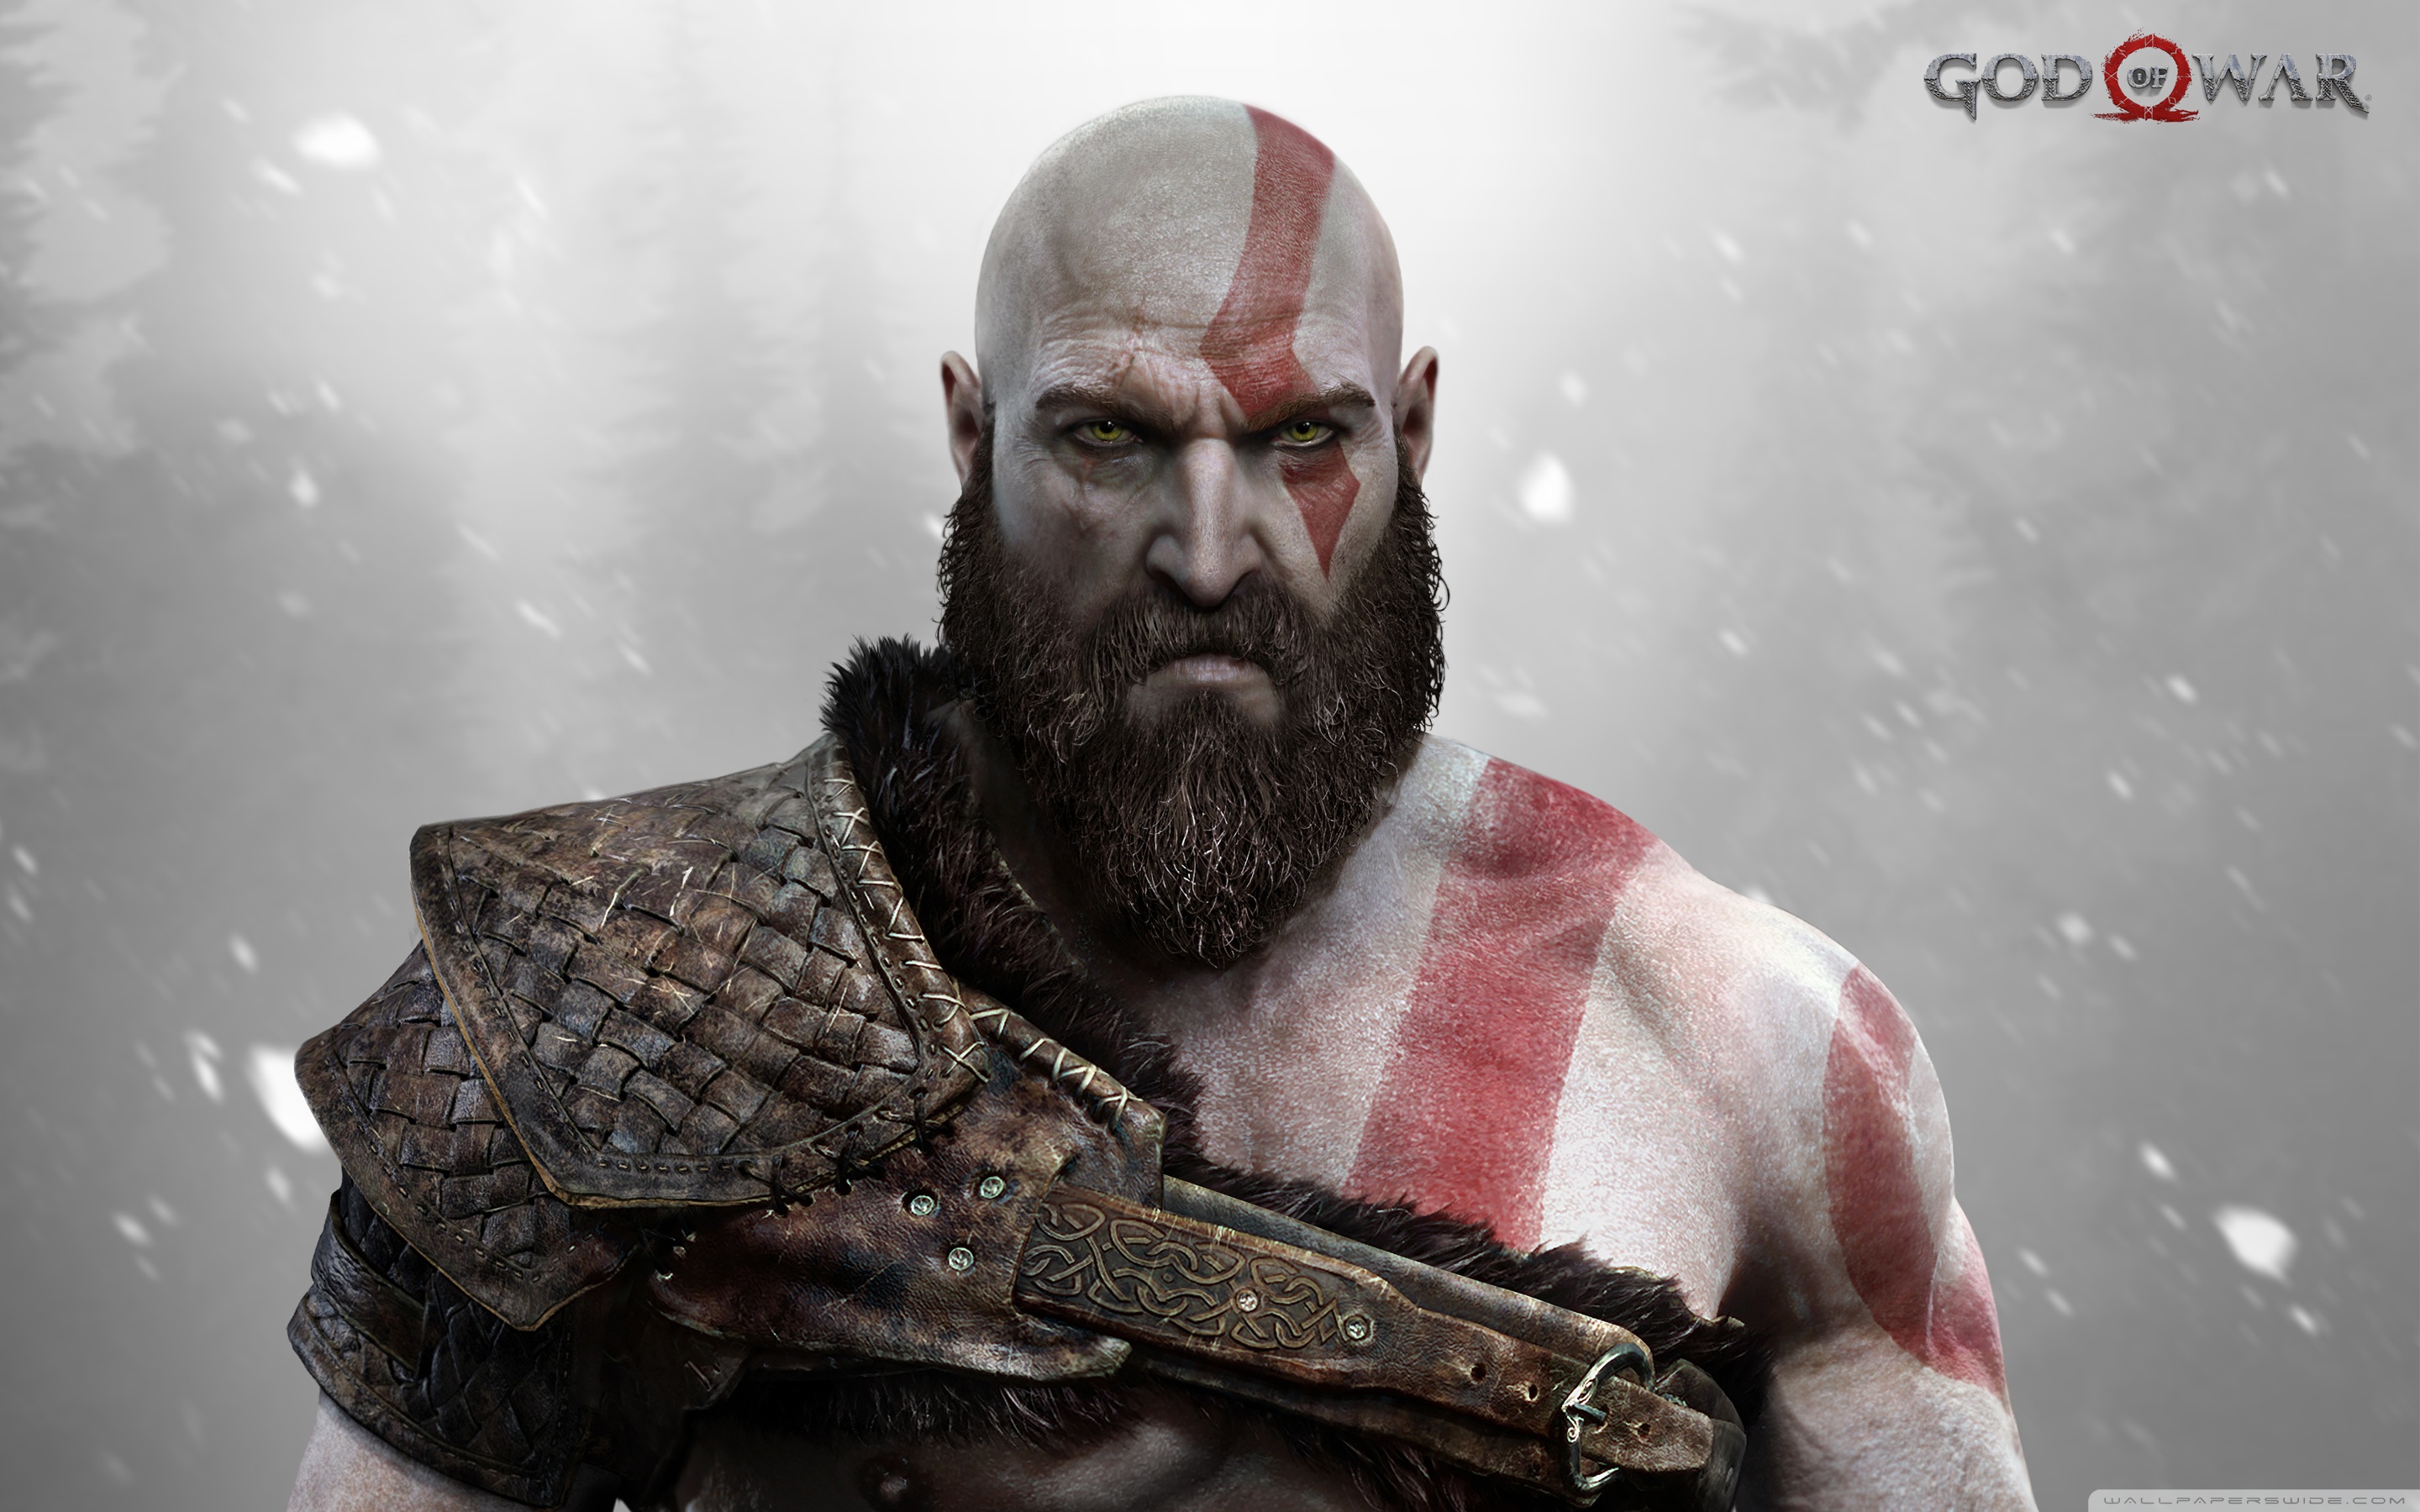 God Of War Backgrounds, Compatible - PC, Mobile, Gadgets| 2880x1800 px